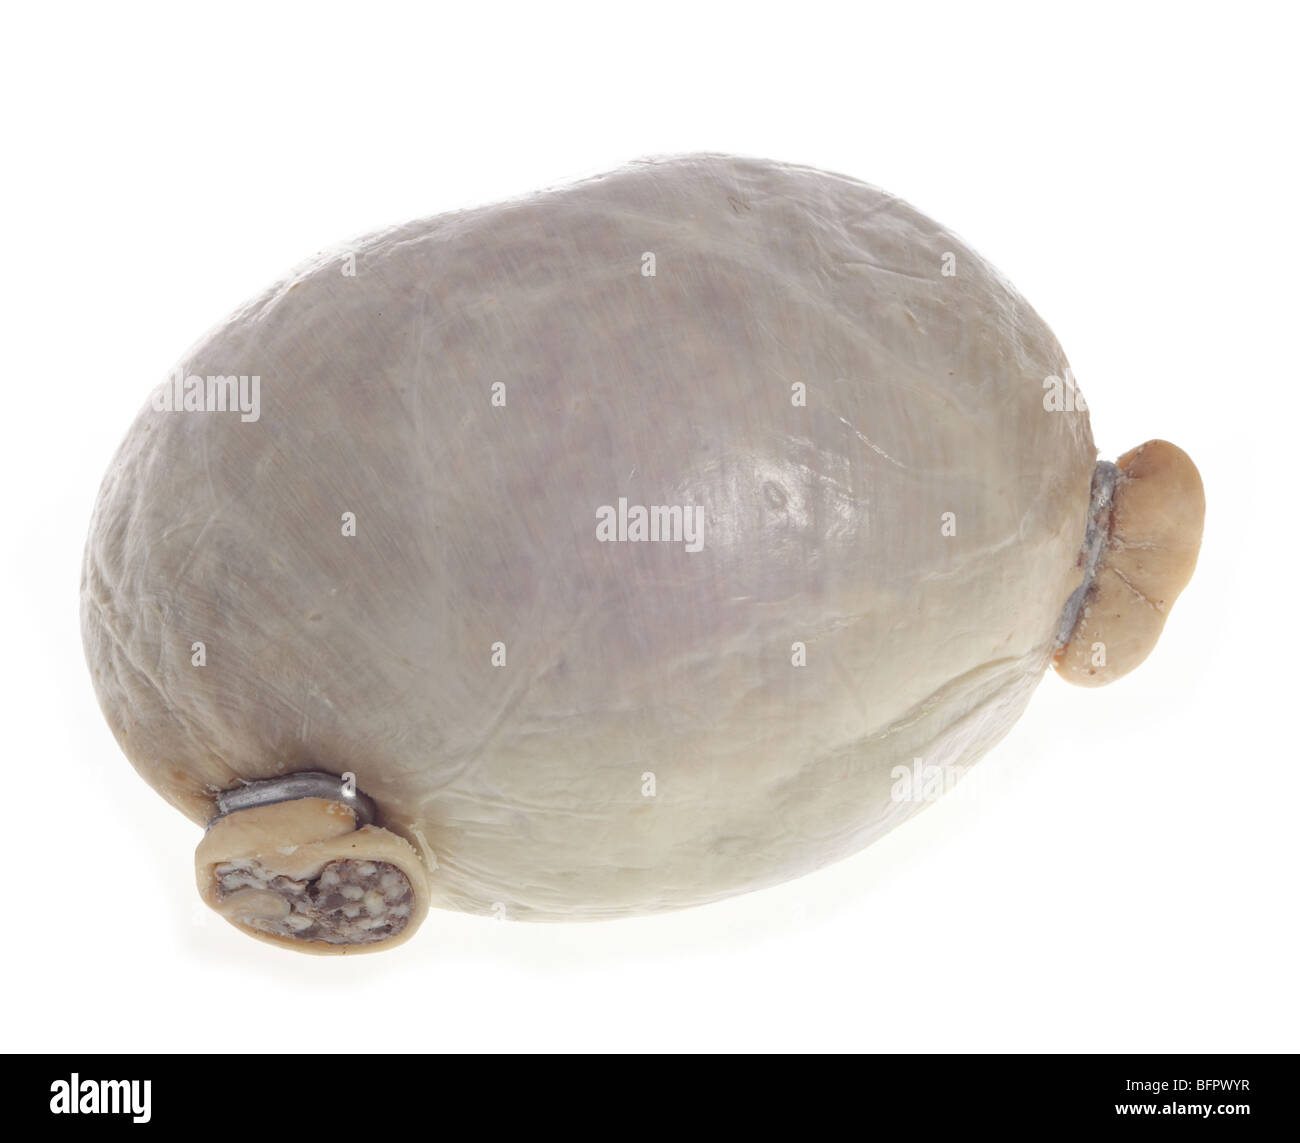 A traditional Scottish haggis, a sheep's stomach stuffed with chopped offal and barley, isolated on white. Stock Photo